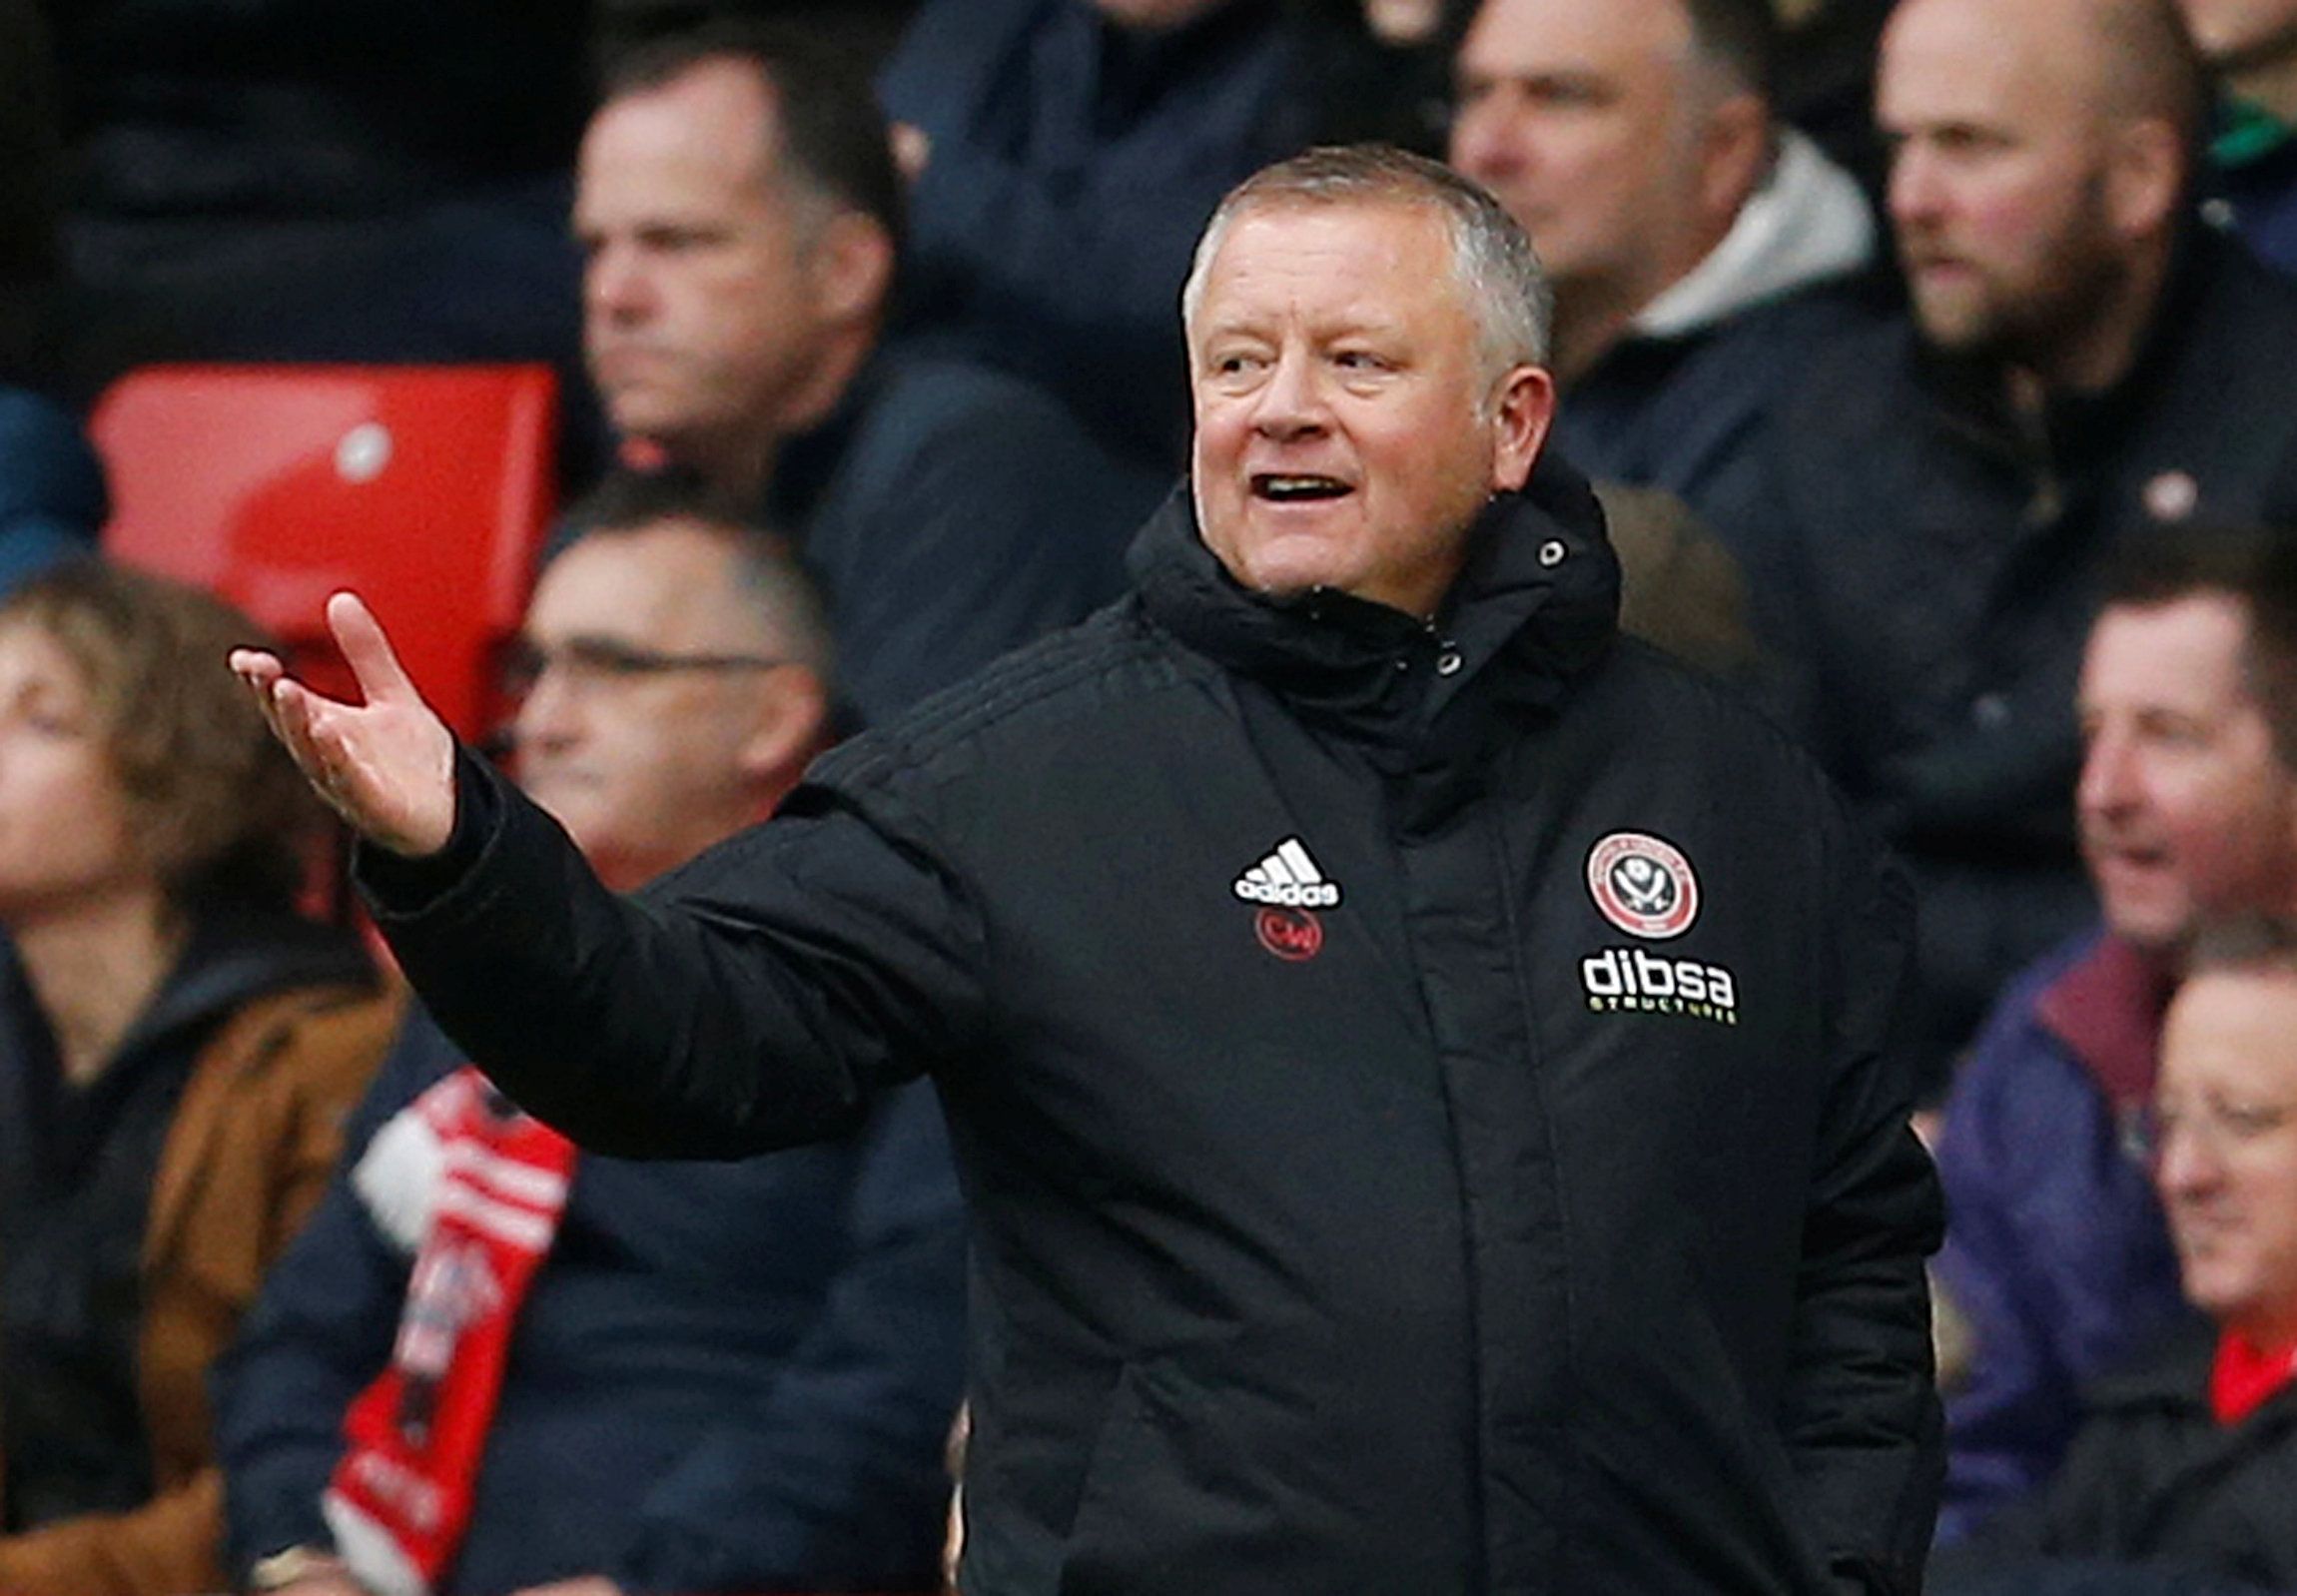 Soccer Football - Championship - Sheffield United v Leeds United - Bramall Lane, Sheffield, Britain - December 1, 2018   Sheffield United manager Chris Wilder gestures   Action Images/Craig Brough    EDITORIAL USE ONLY. No use with unauthorized audio, video, data, fixture lists, club/league logos or "live" services. Online in-match use limited to 75 images, no video emulation. No use in betting, games or single club/league/player publications.  Please contact your account representative for furt